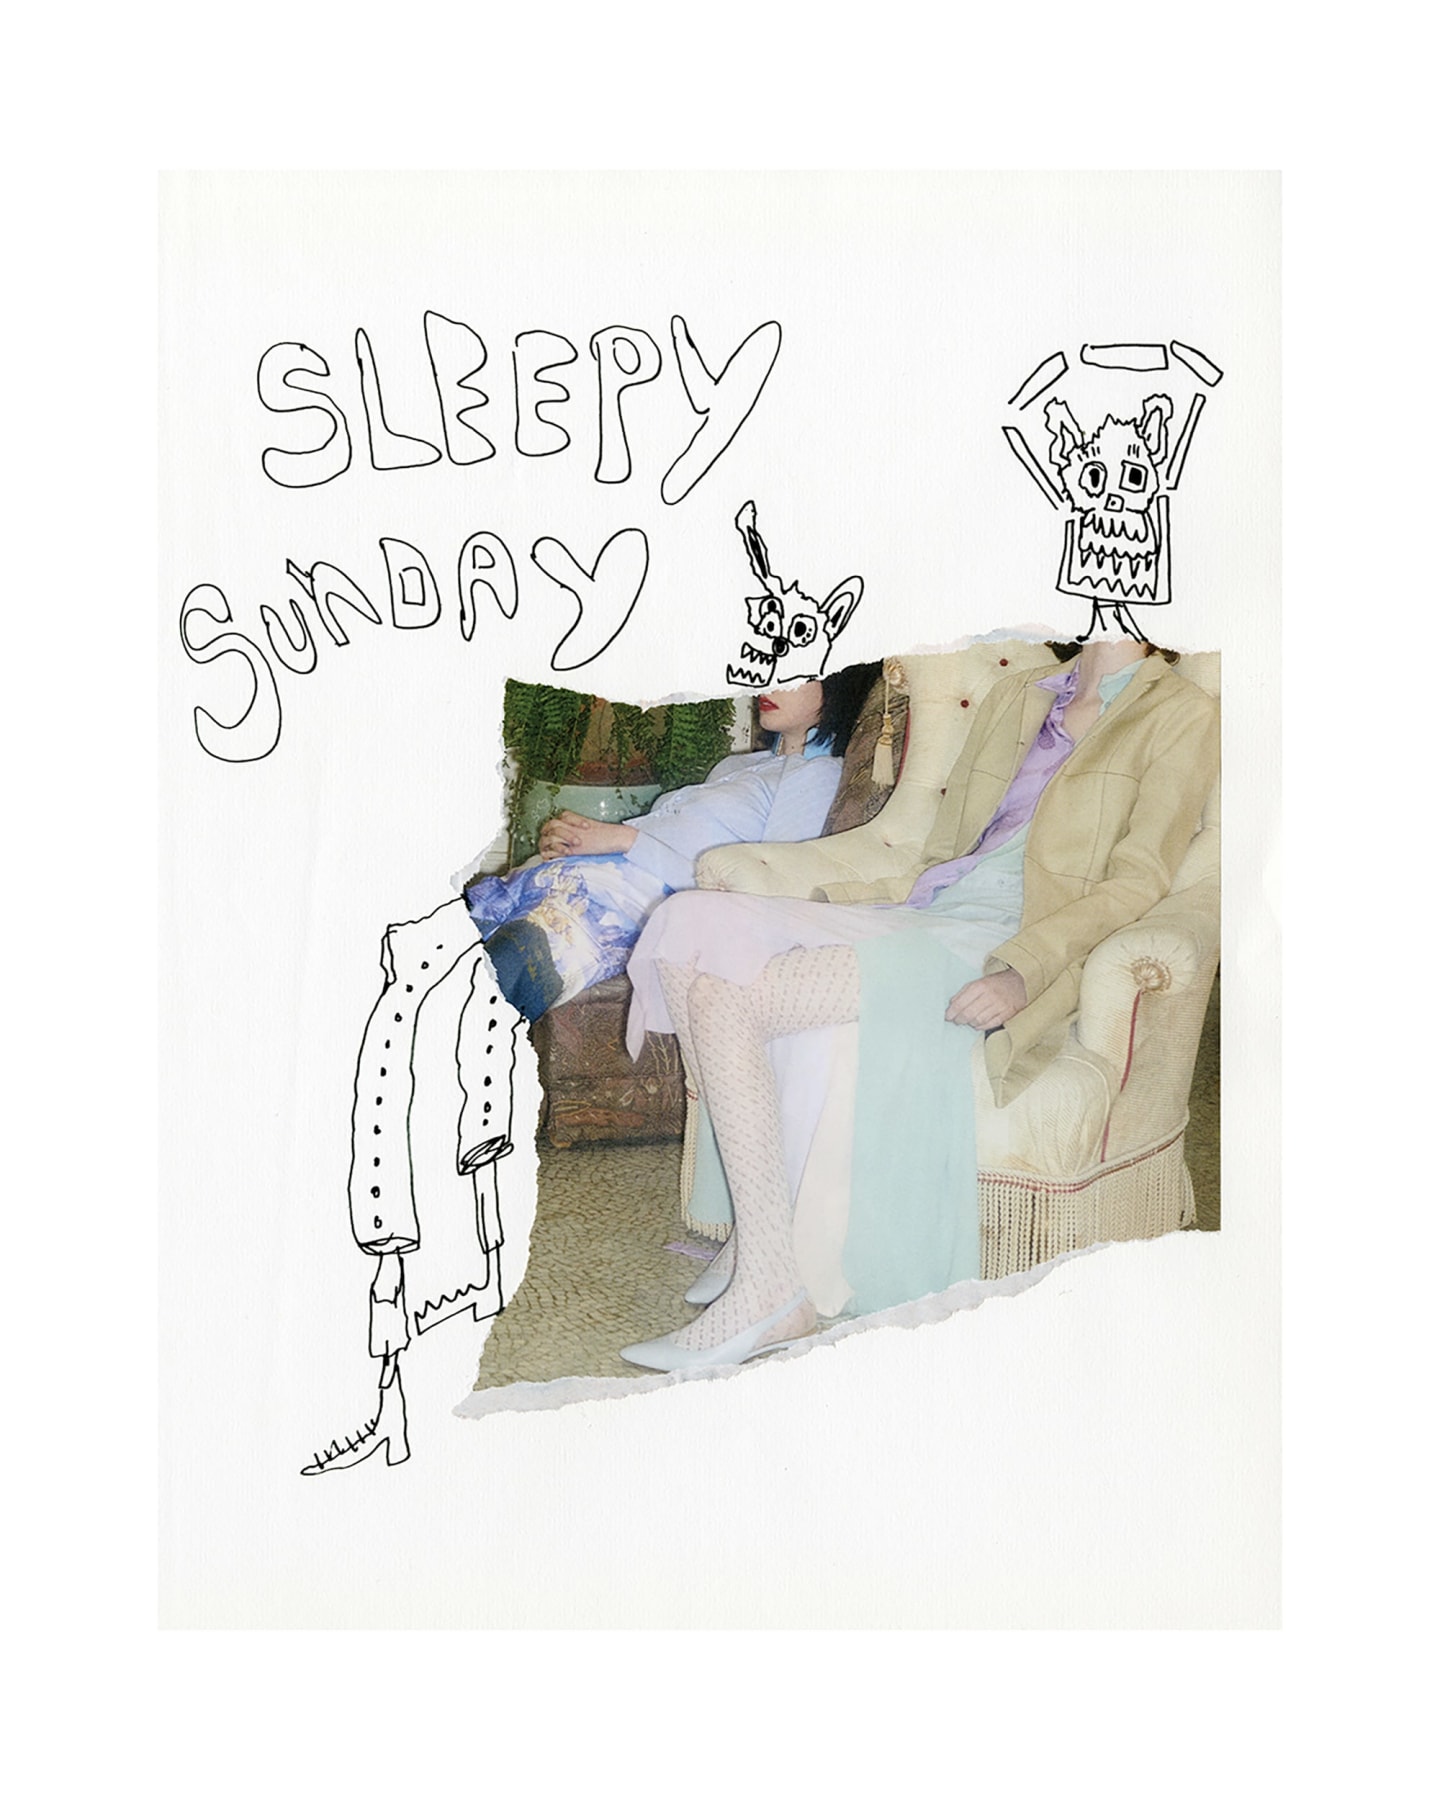 Michael Stiegler  Sleepy Sunday (unframed), 2019 art from the exhibition on Bowery at Lone Goat Gallery